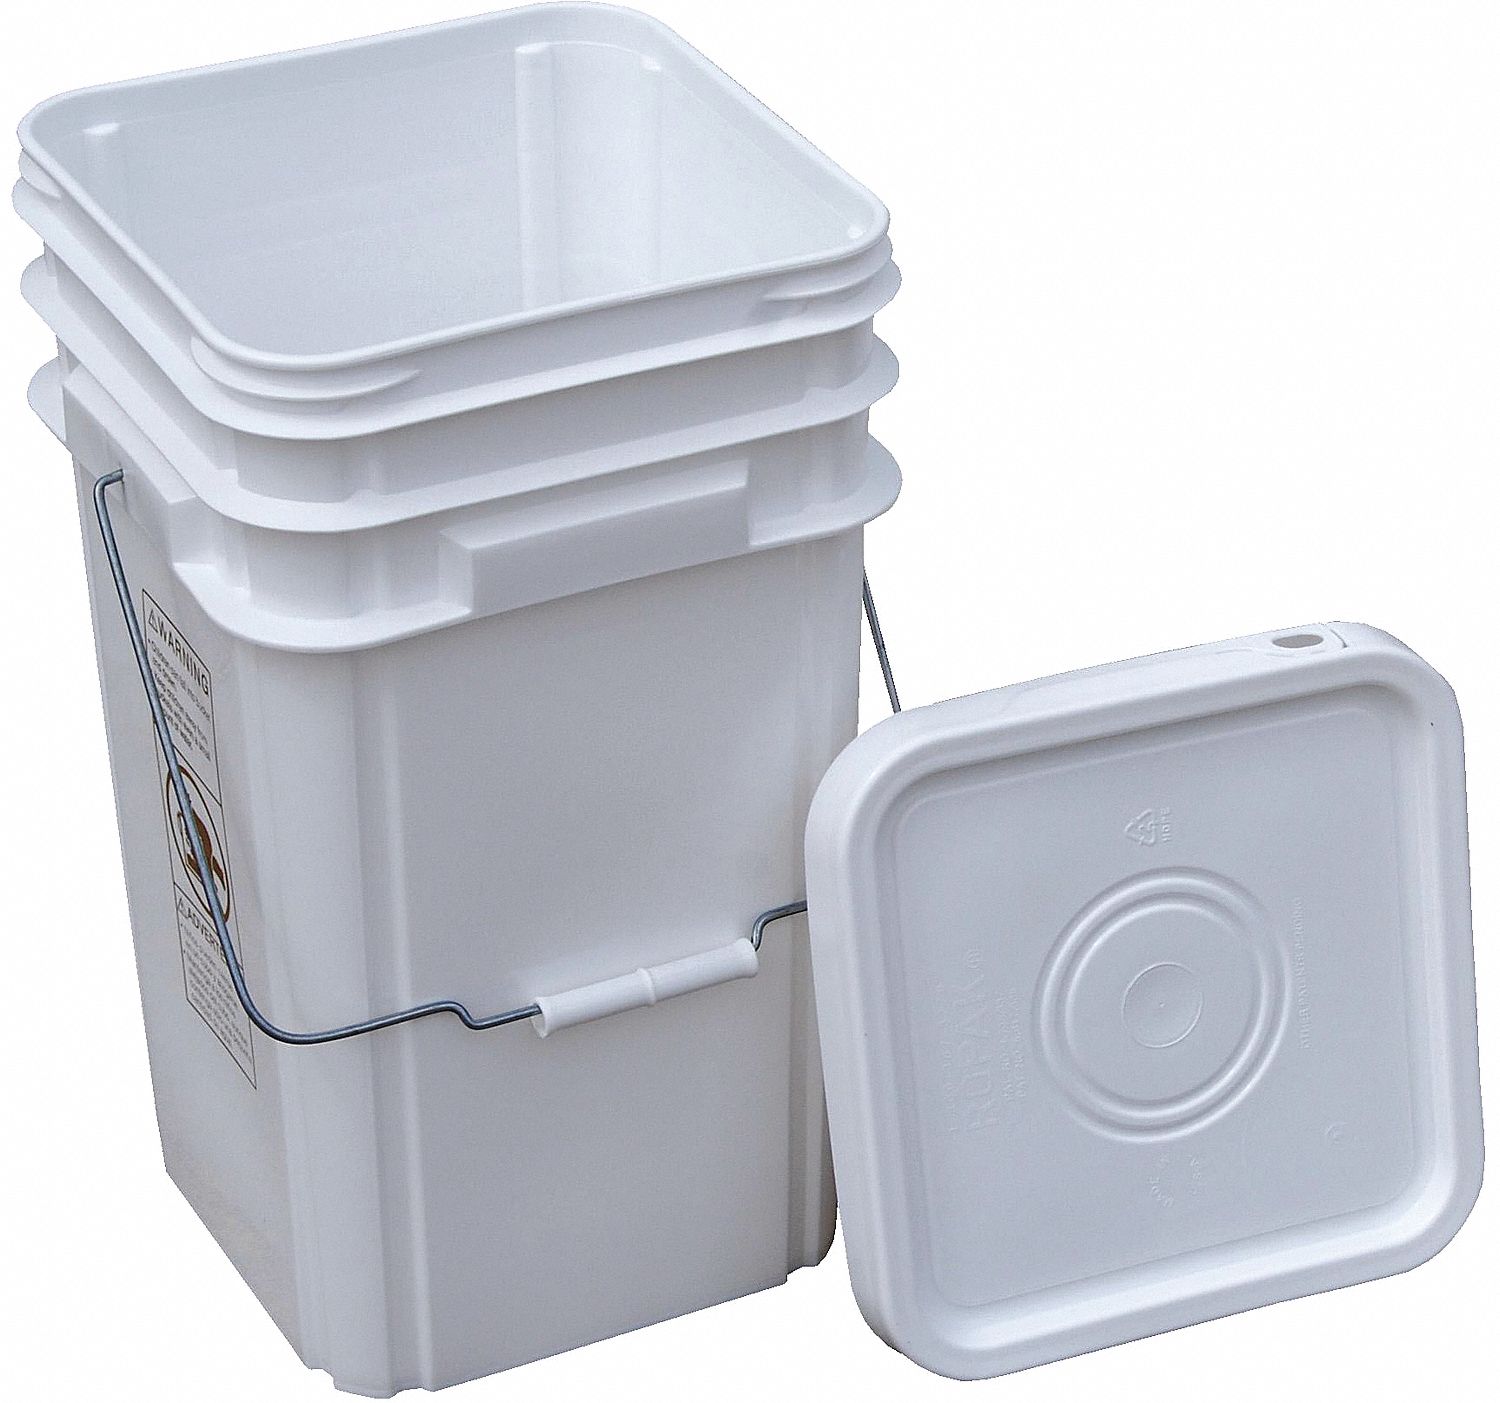 5 gallon square bucket with lid